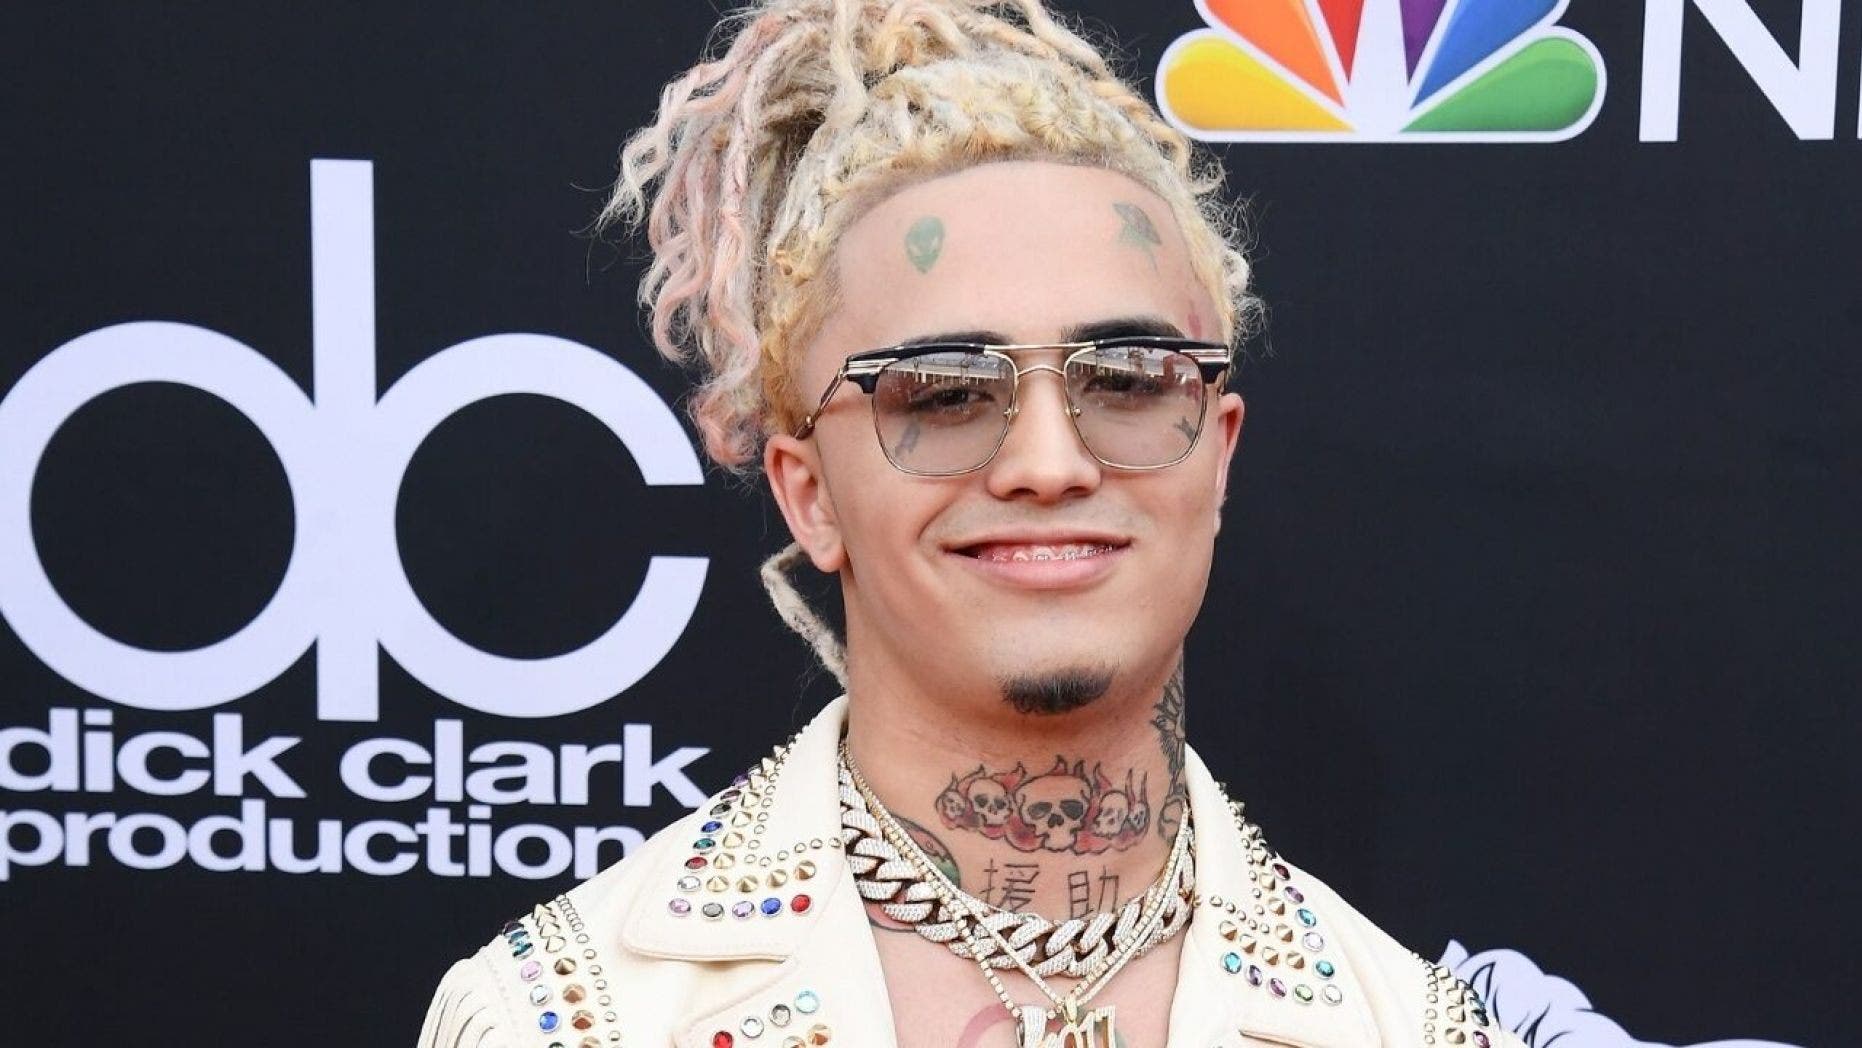 Lil Pump endorses Donald Trump for president, prompts record label to